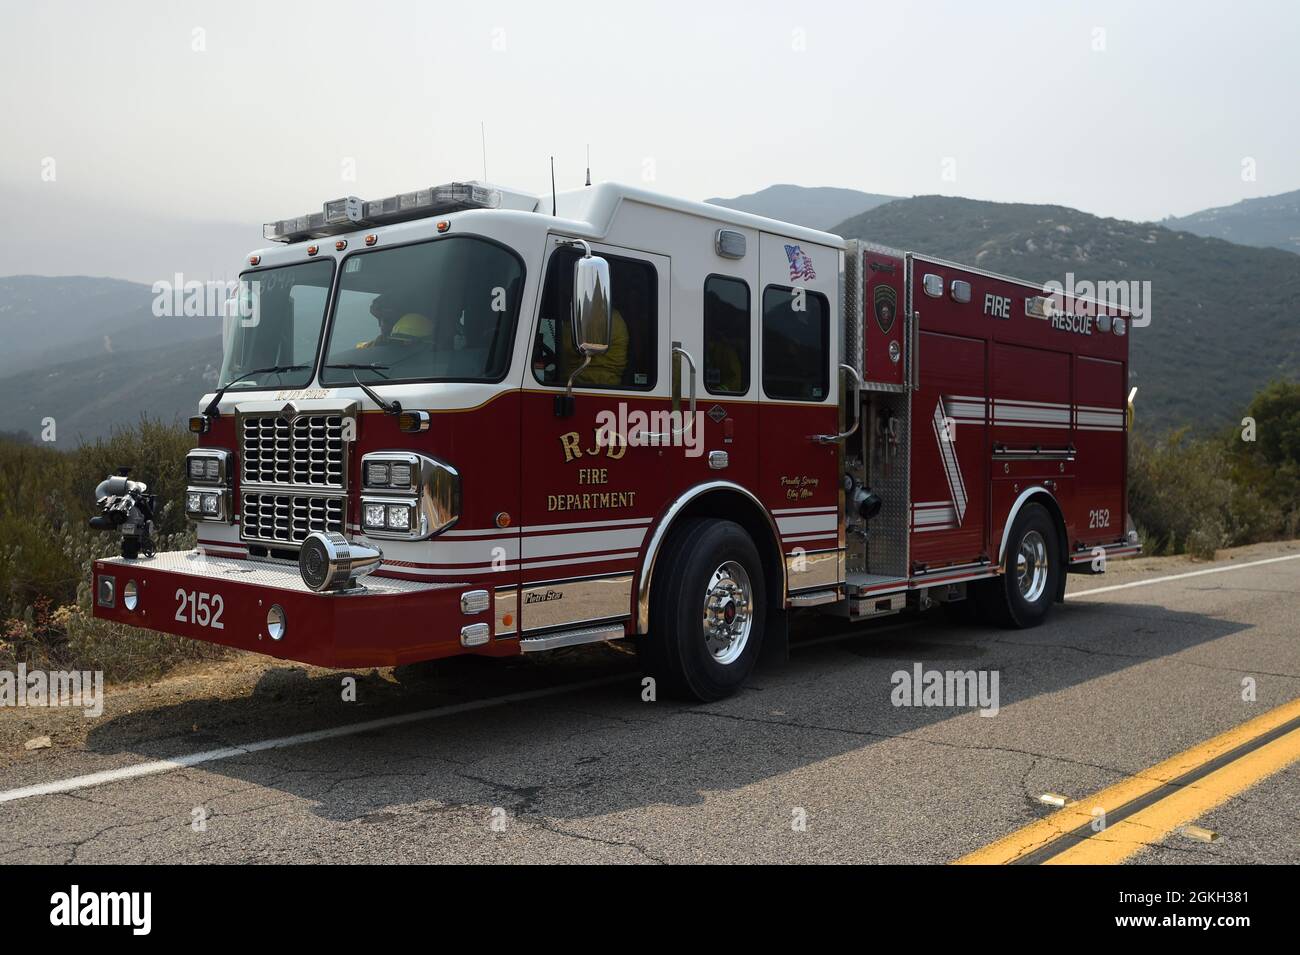 Richard J Donovan Correctional Facility Apparatus 2152 standing by for a call up at the Valley Fire, east of San Diego Stock Photo